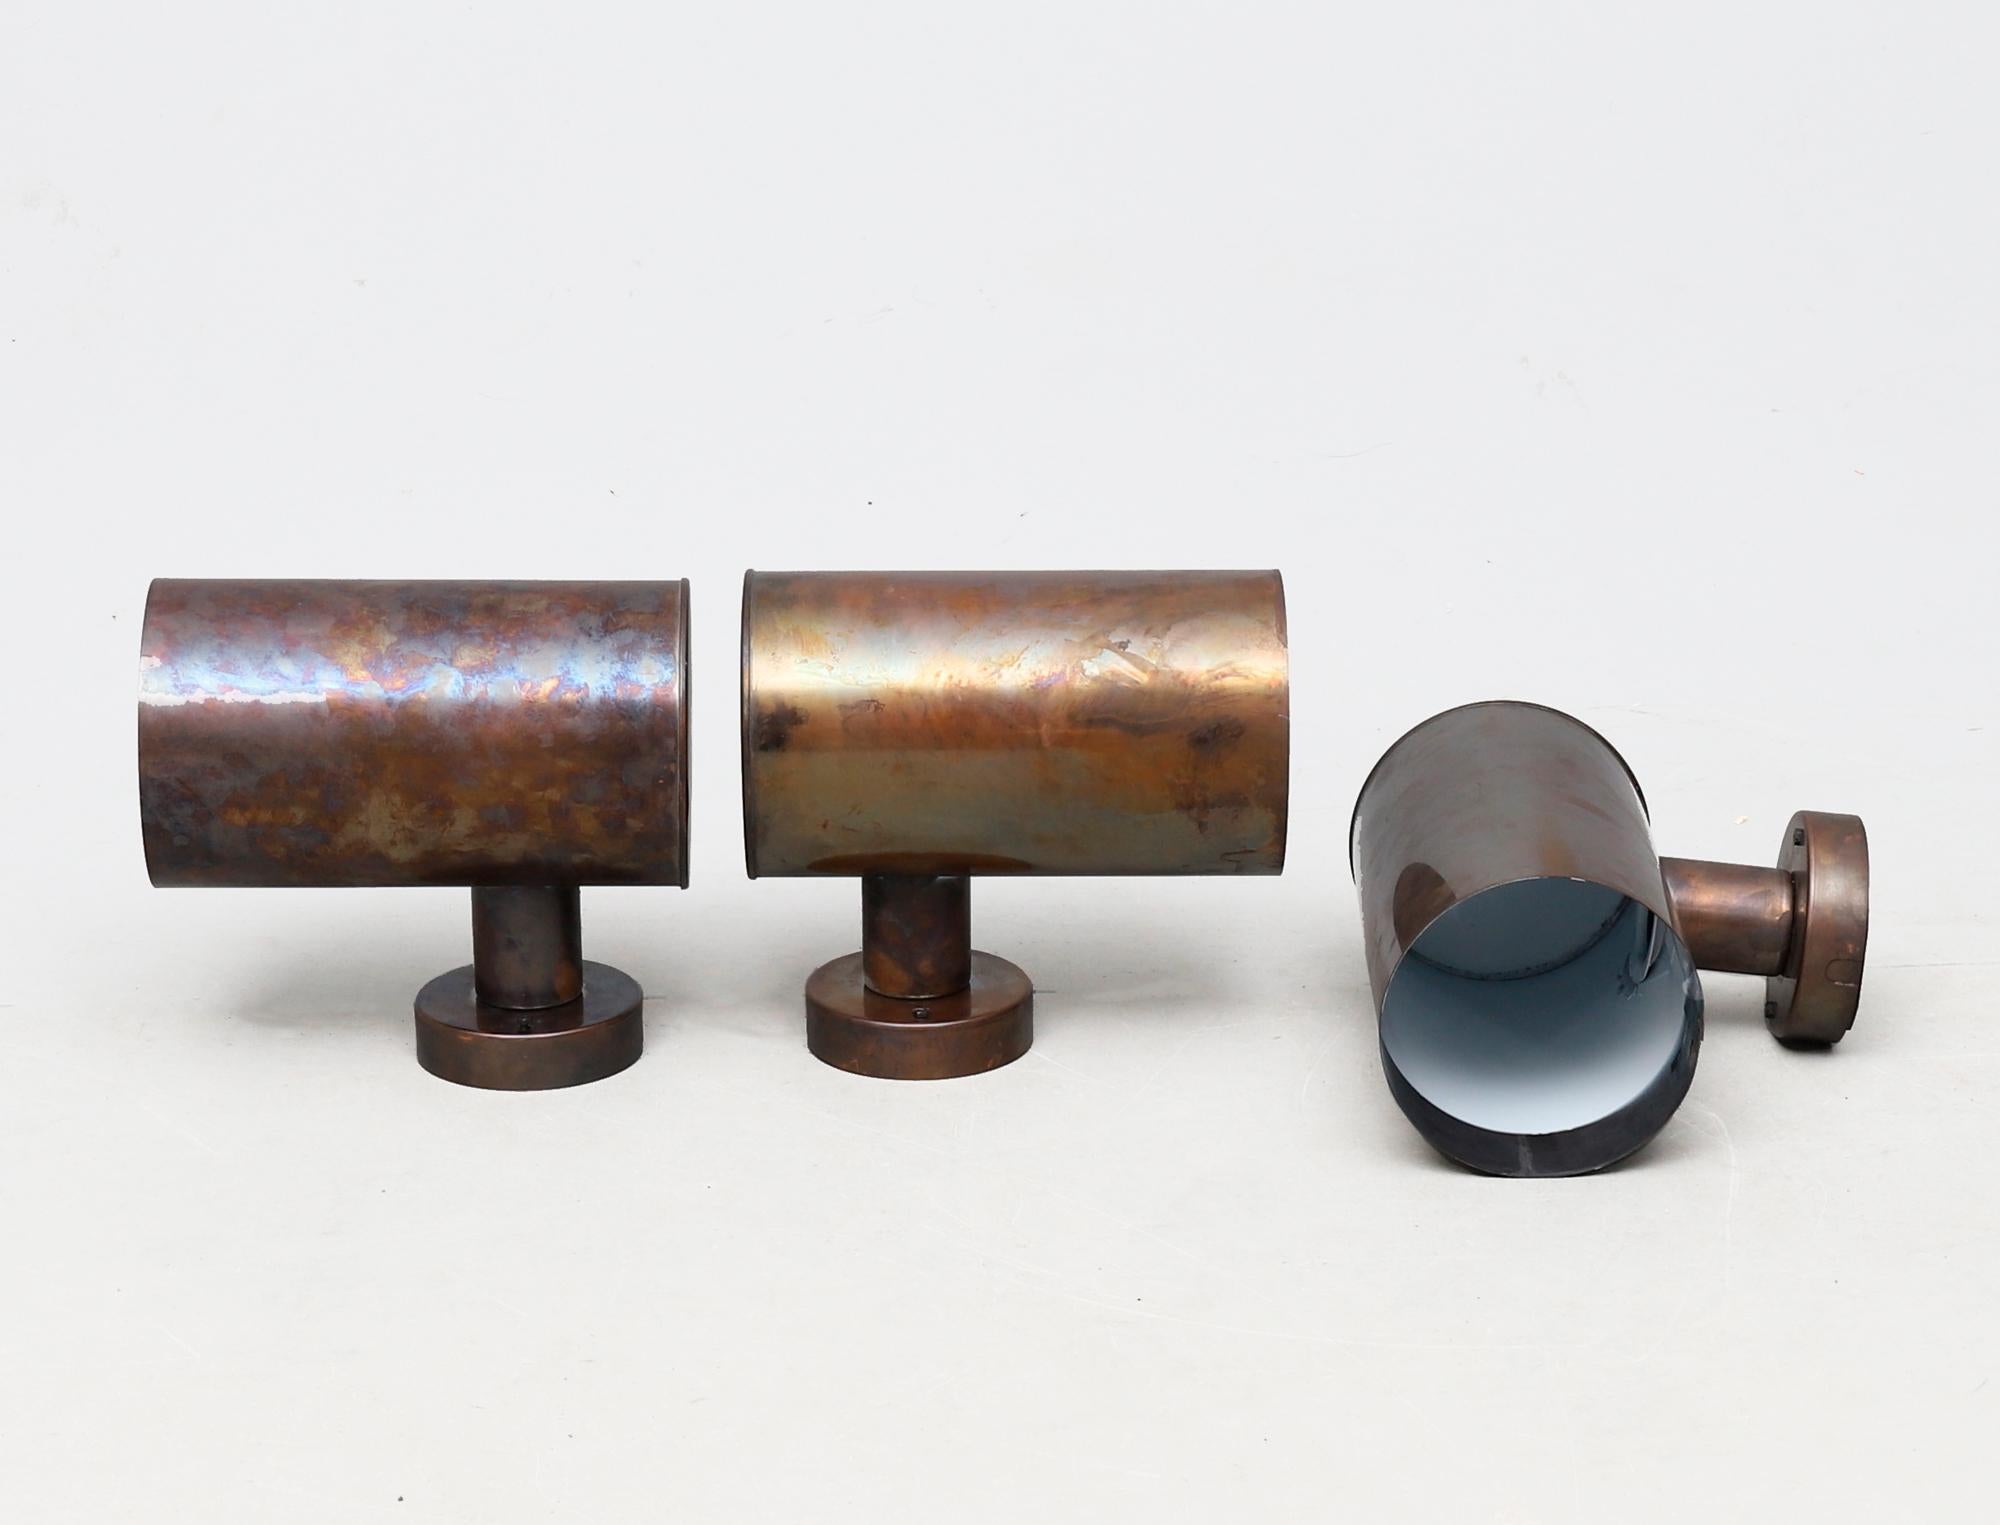 Three cylindrical outdoor Scandinavian Modern wall lamps by Fagerhults, Sweden. Made of copper with and has a beautiful patina.
Please note: Listed price is for one (1) wall lamp.